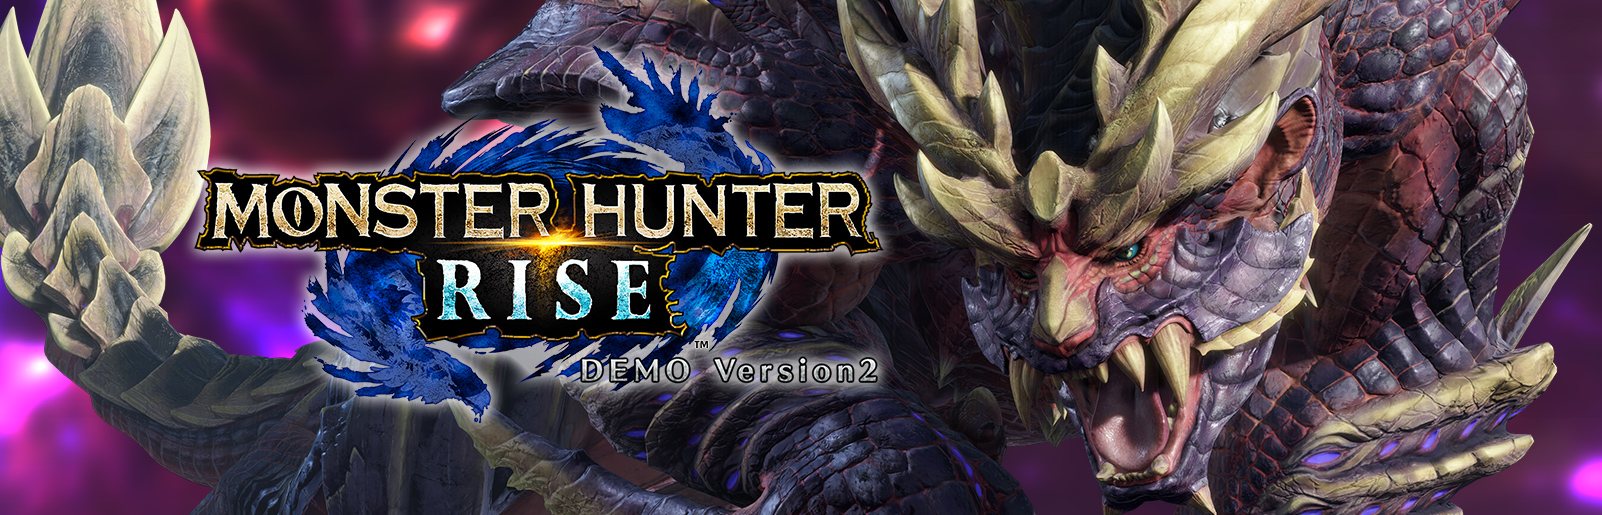 monster hunter rise failed to save